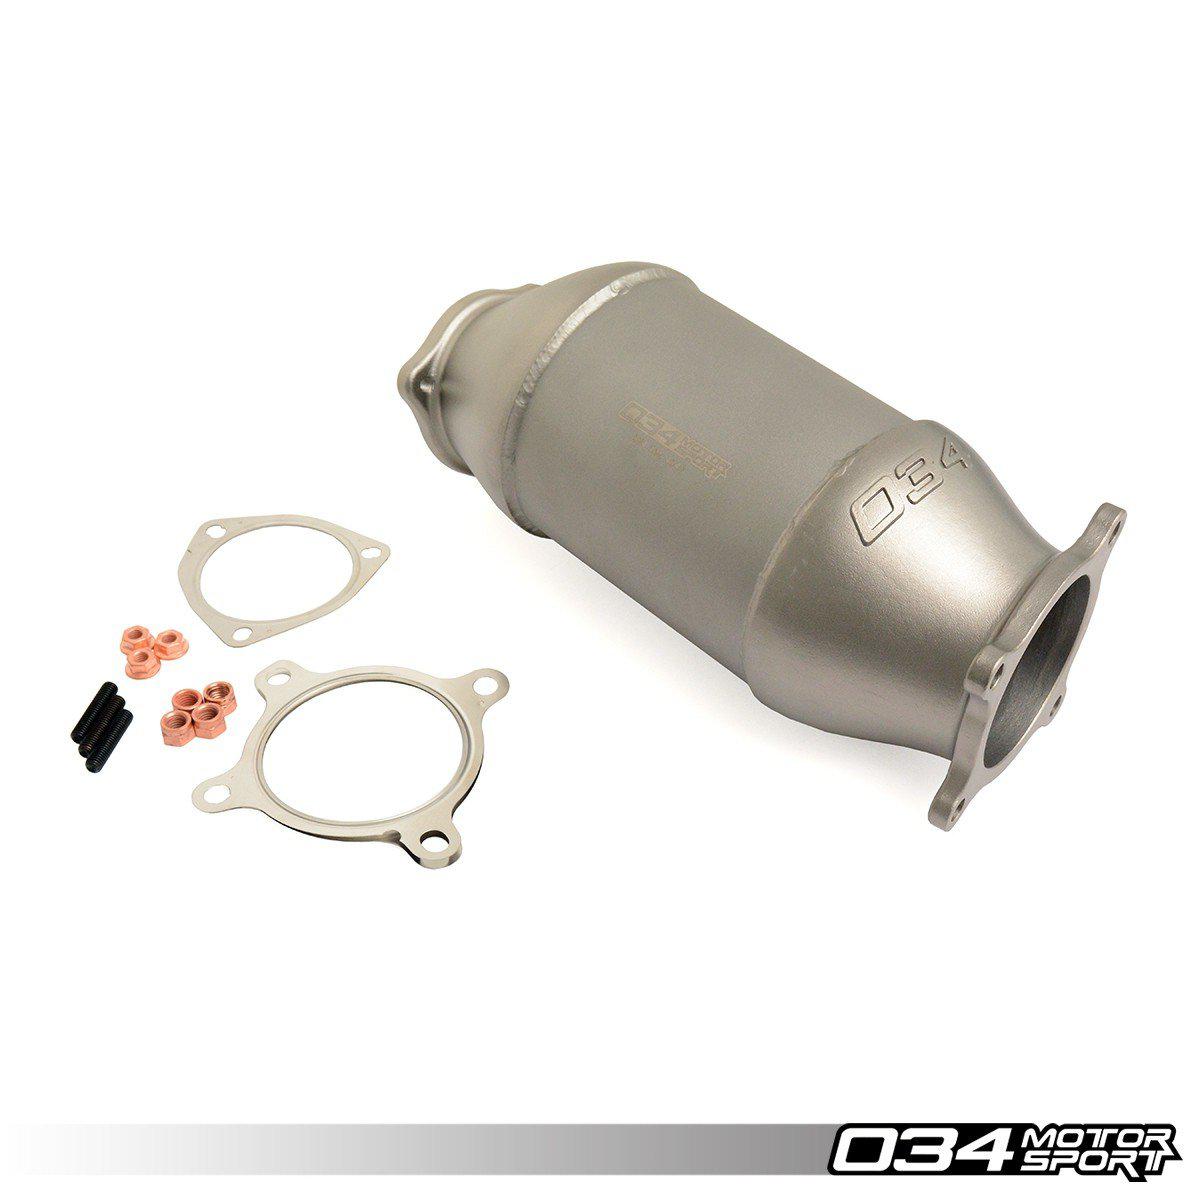 Cast Stainless Steel Racing Catalyst, B9 Audi A4/A5 & Allroad 2.0 TFSI-A Little Tuning Co